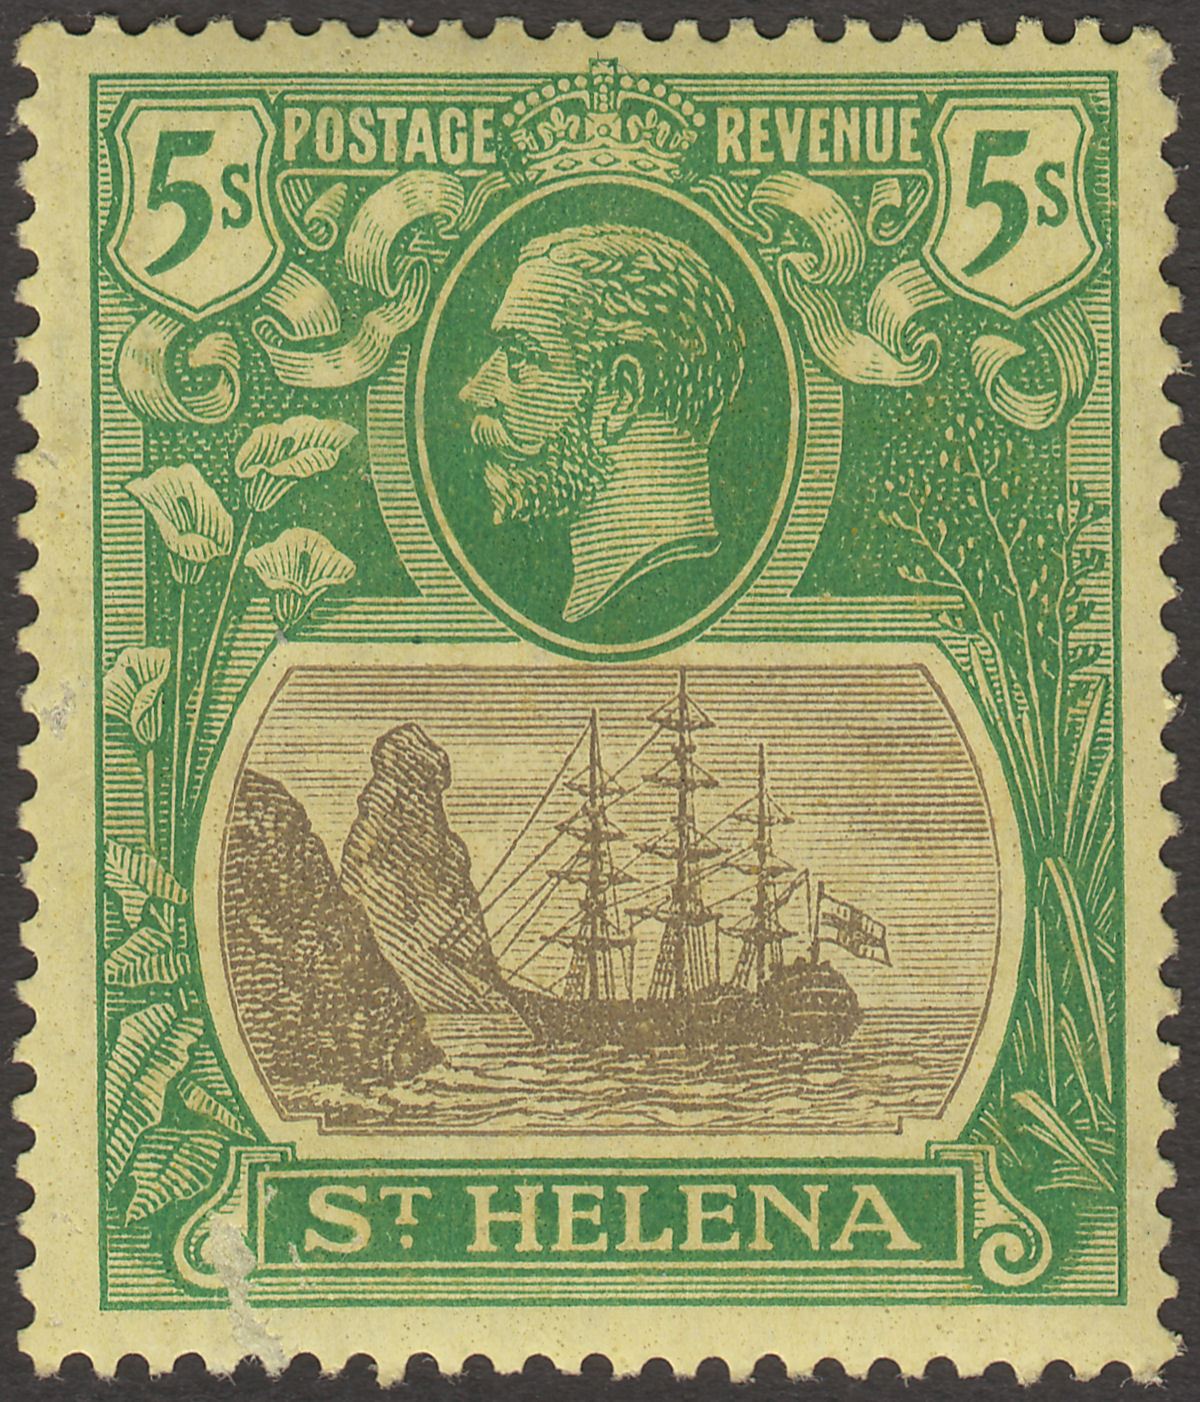 St Helena 1927 KGV 5sh Grey and Green on Yellow Mint SG110 cat £45 with fault